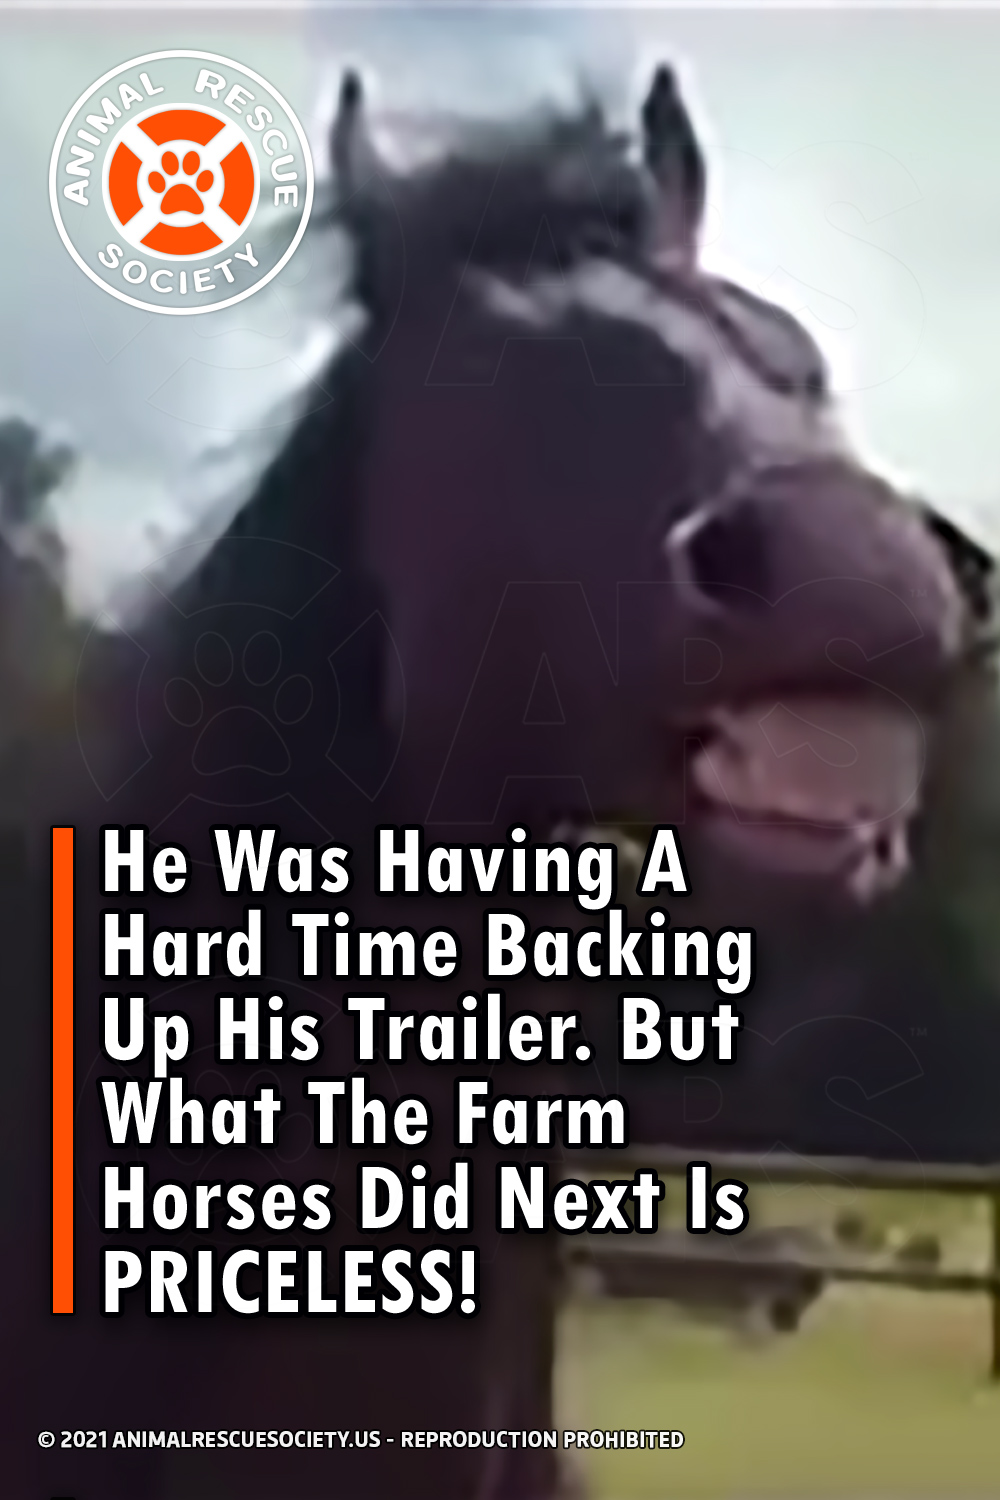 He Was Having A Hard Time Backing Up His Trailer. But What The Farm Horses Did Next Is PRICELESS!